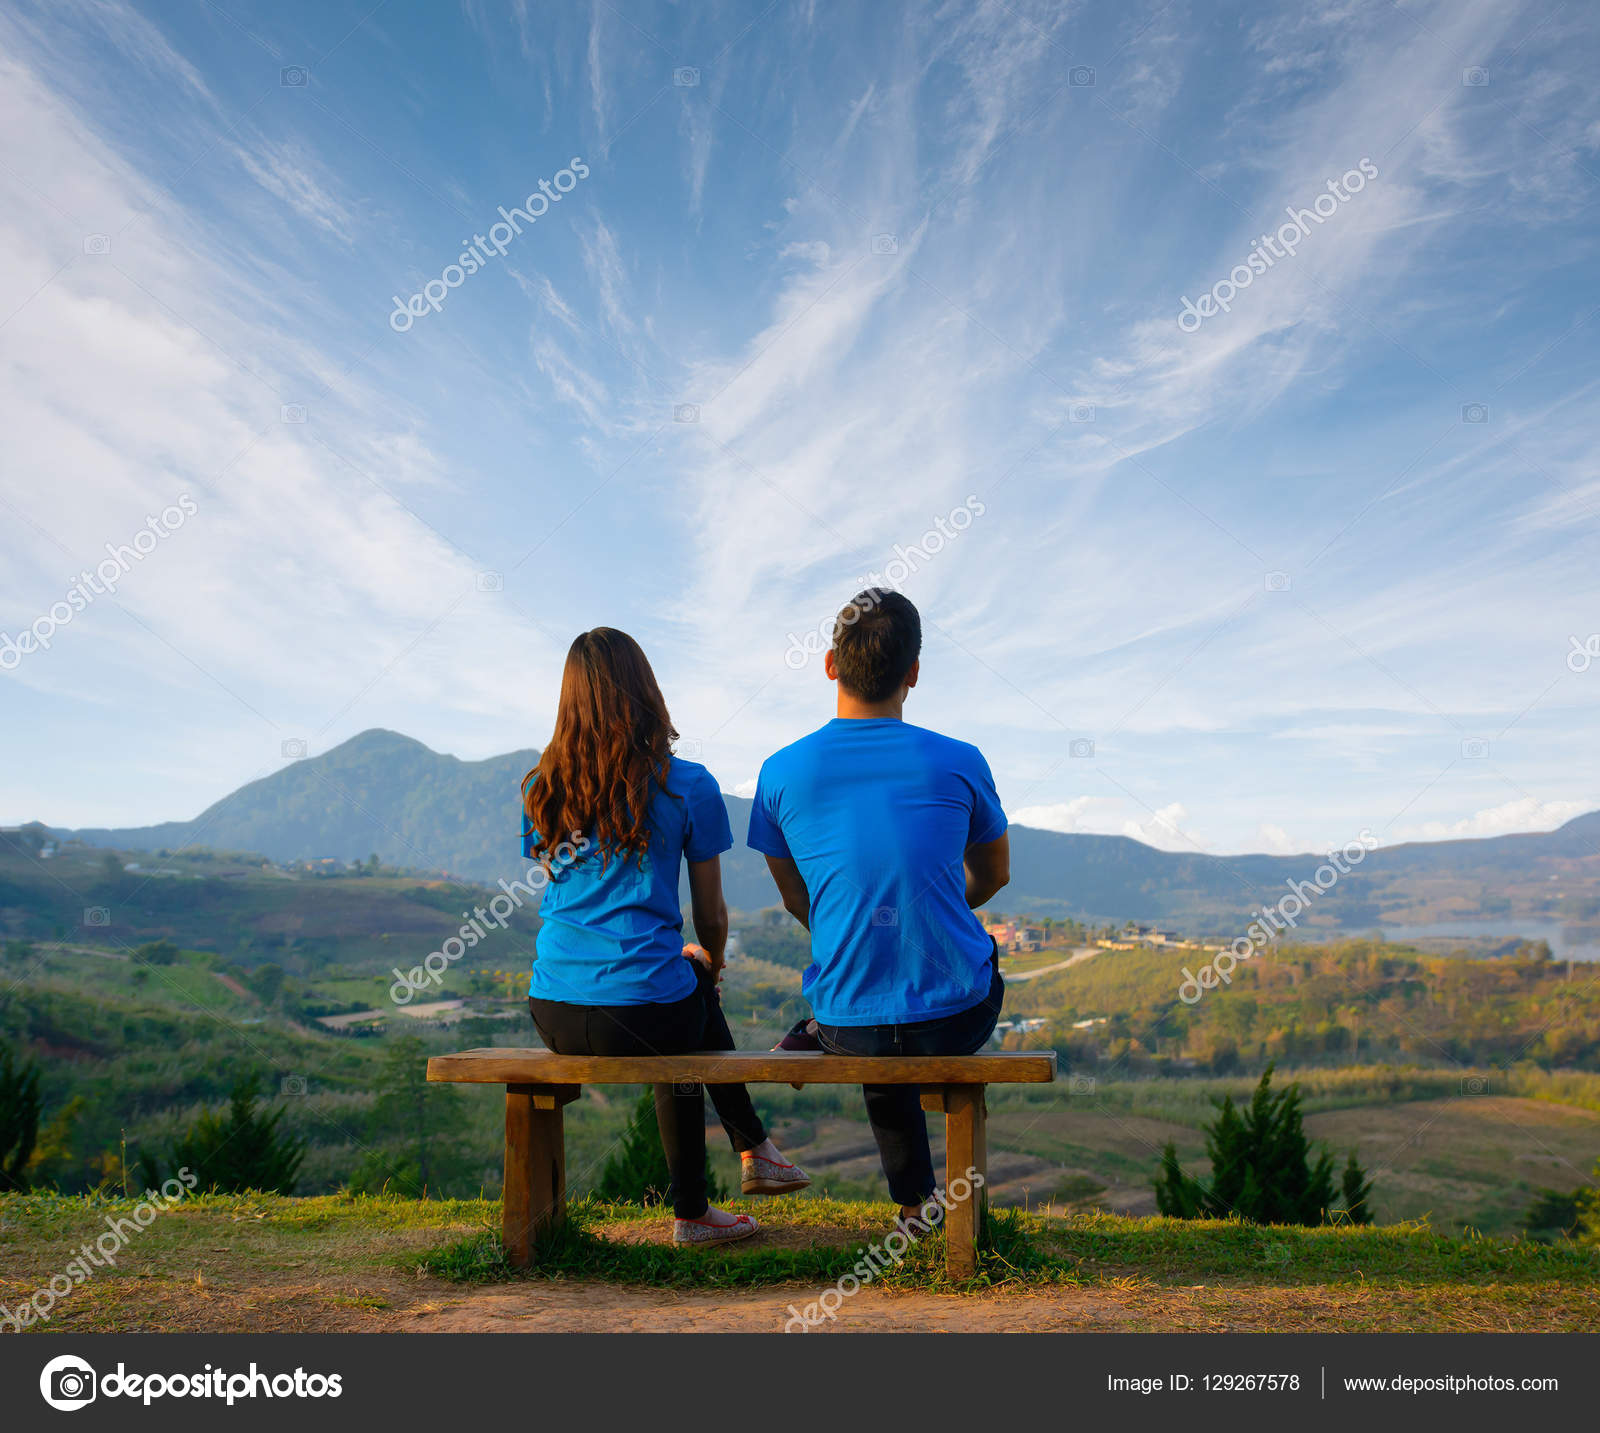 Scene of romantic and happy asian young romantic couple sitting and hugging  with natural background ; happy traveling concept, sweet lover concept.  Stock Photo by ©thatreec 129267578